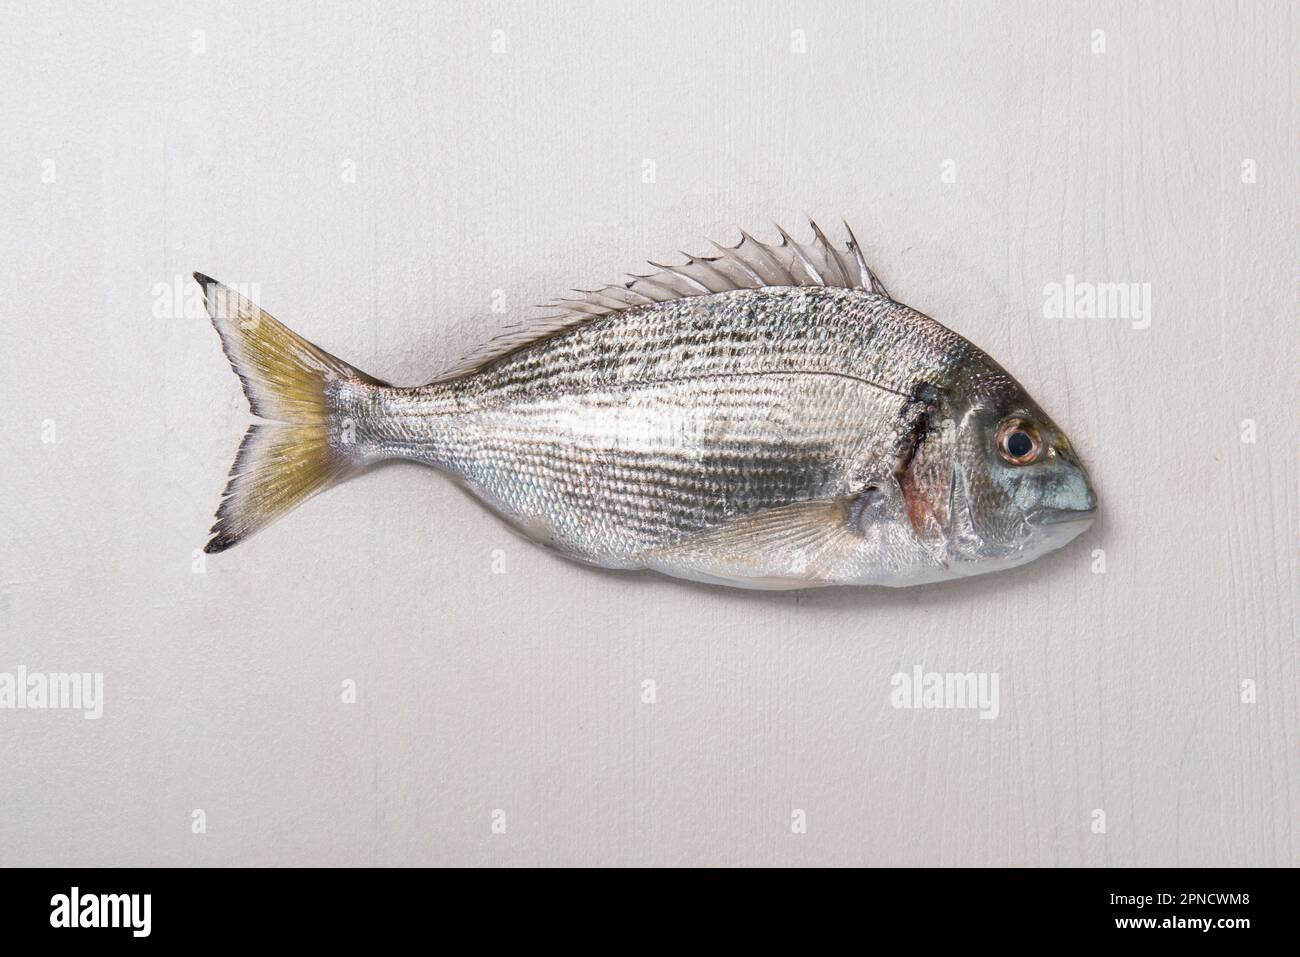 Sea bream, Sparidae fish (Sparus auratus), actively fished for the goodness of the meat in the Tyrrhenian Sea, Italy, Europe Stock Photo